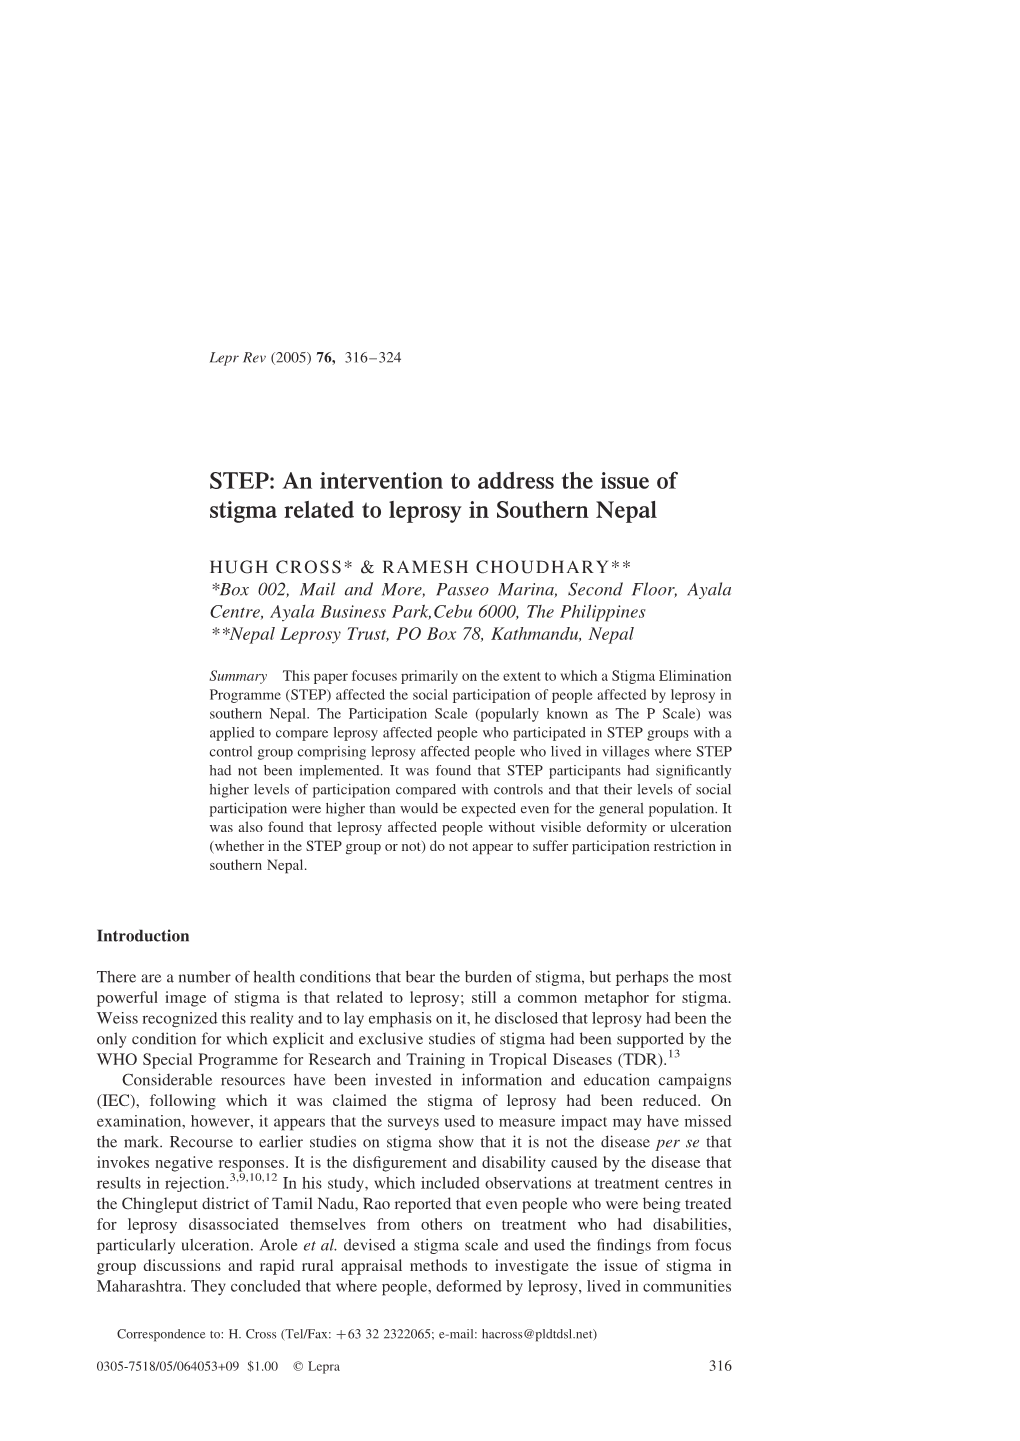 STEP: an Intervention to Address the Issue of Stigma Related to Leprosy in Southern Nepal